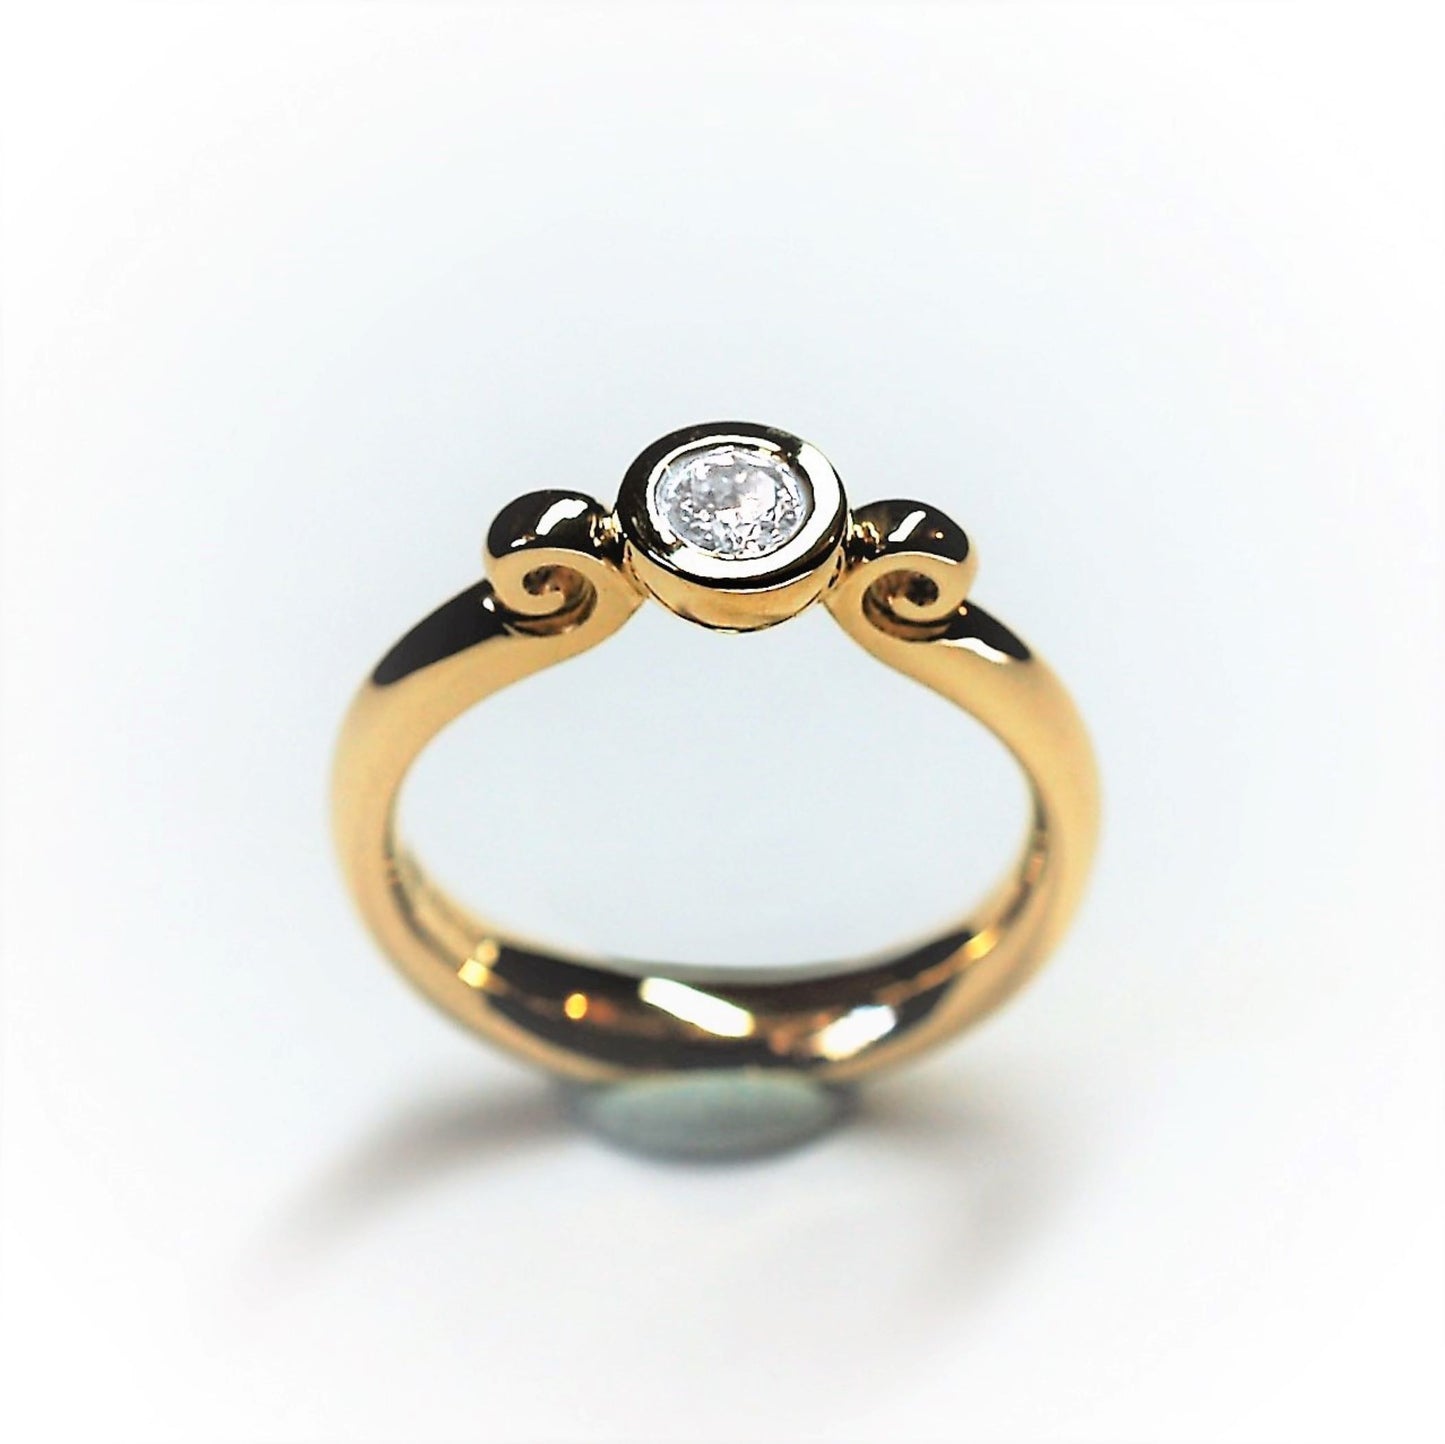 Genuine Fairtrade 18ct gold and 0.16ct Cultured Diamond, environmentally and ethically responsible handmade ring by Adrian Ashley.